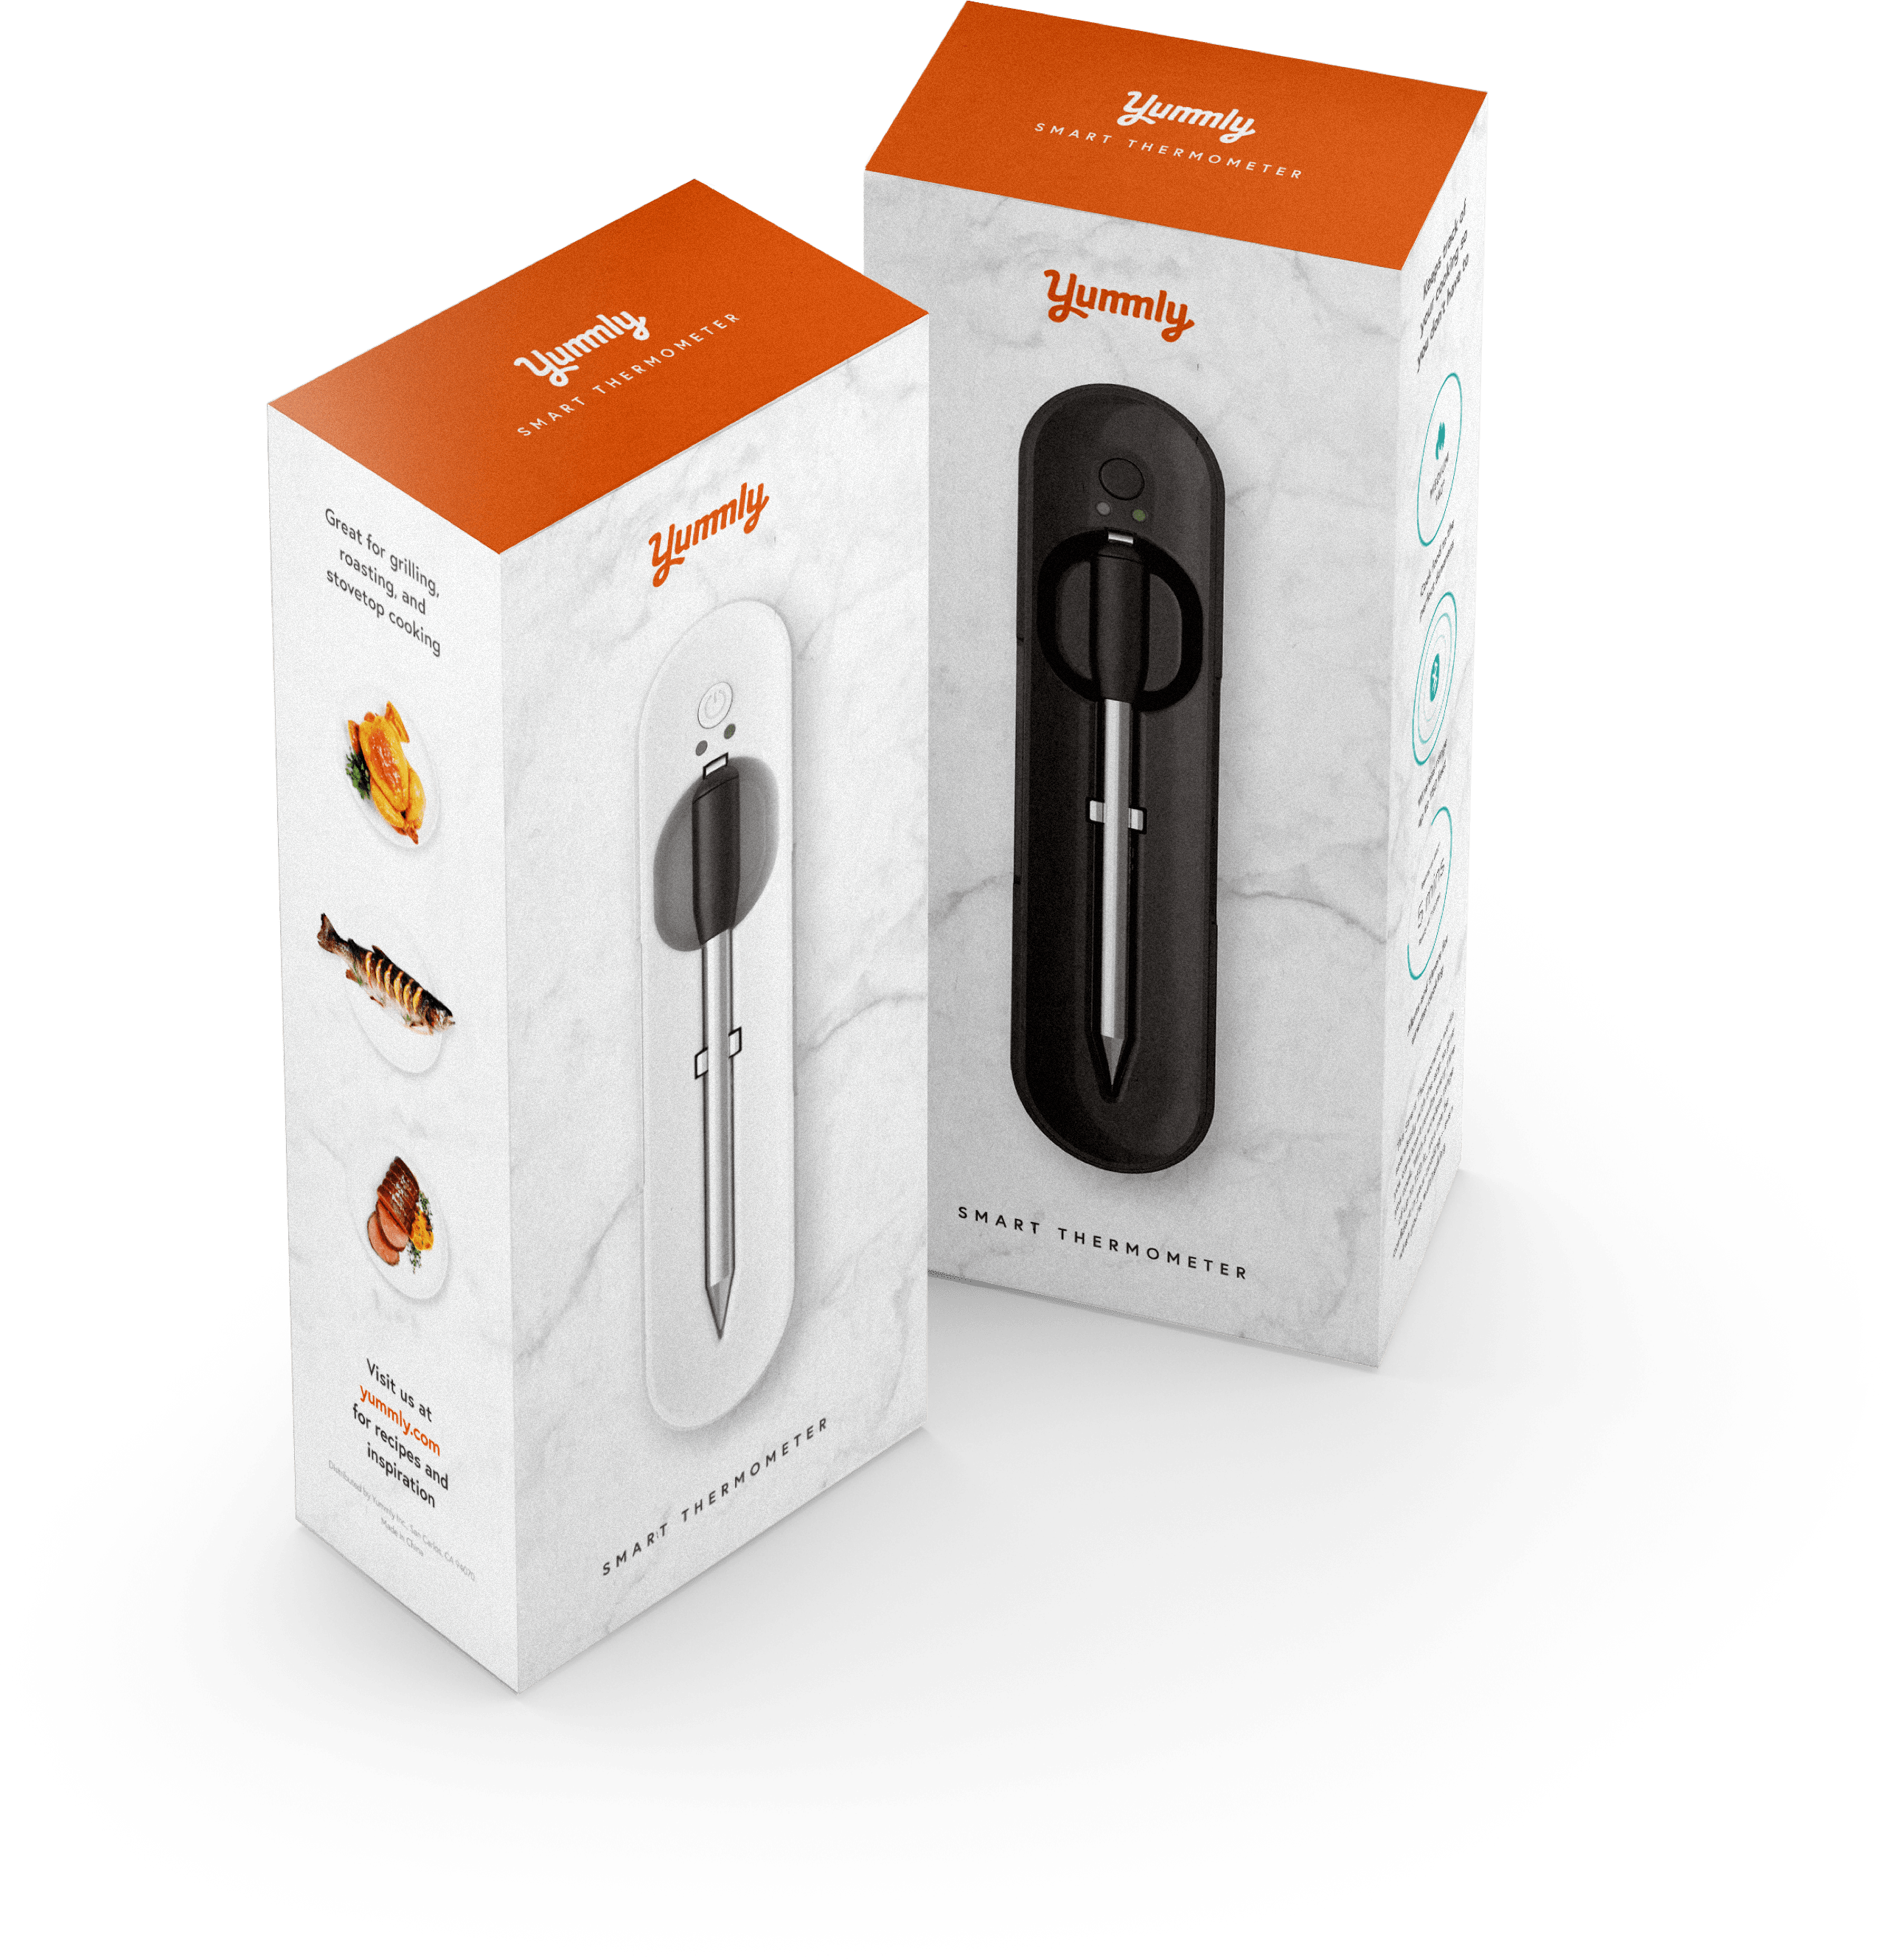 Activate Your Yummly Smart Thermometer